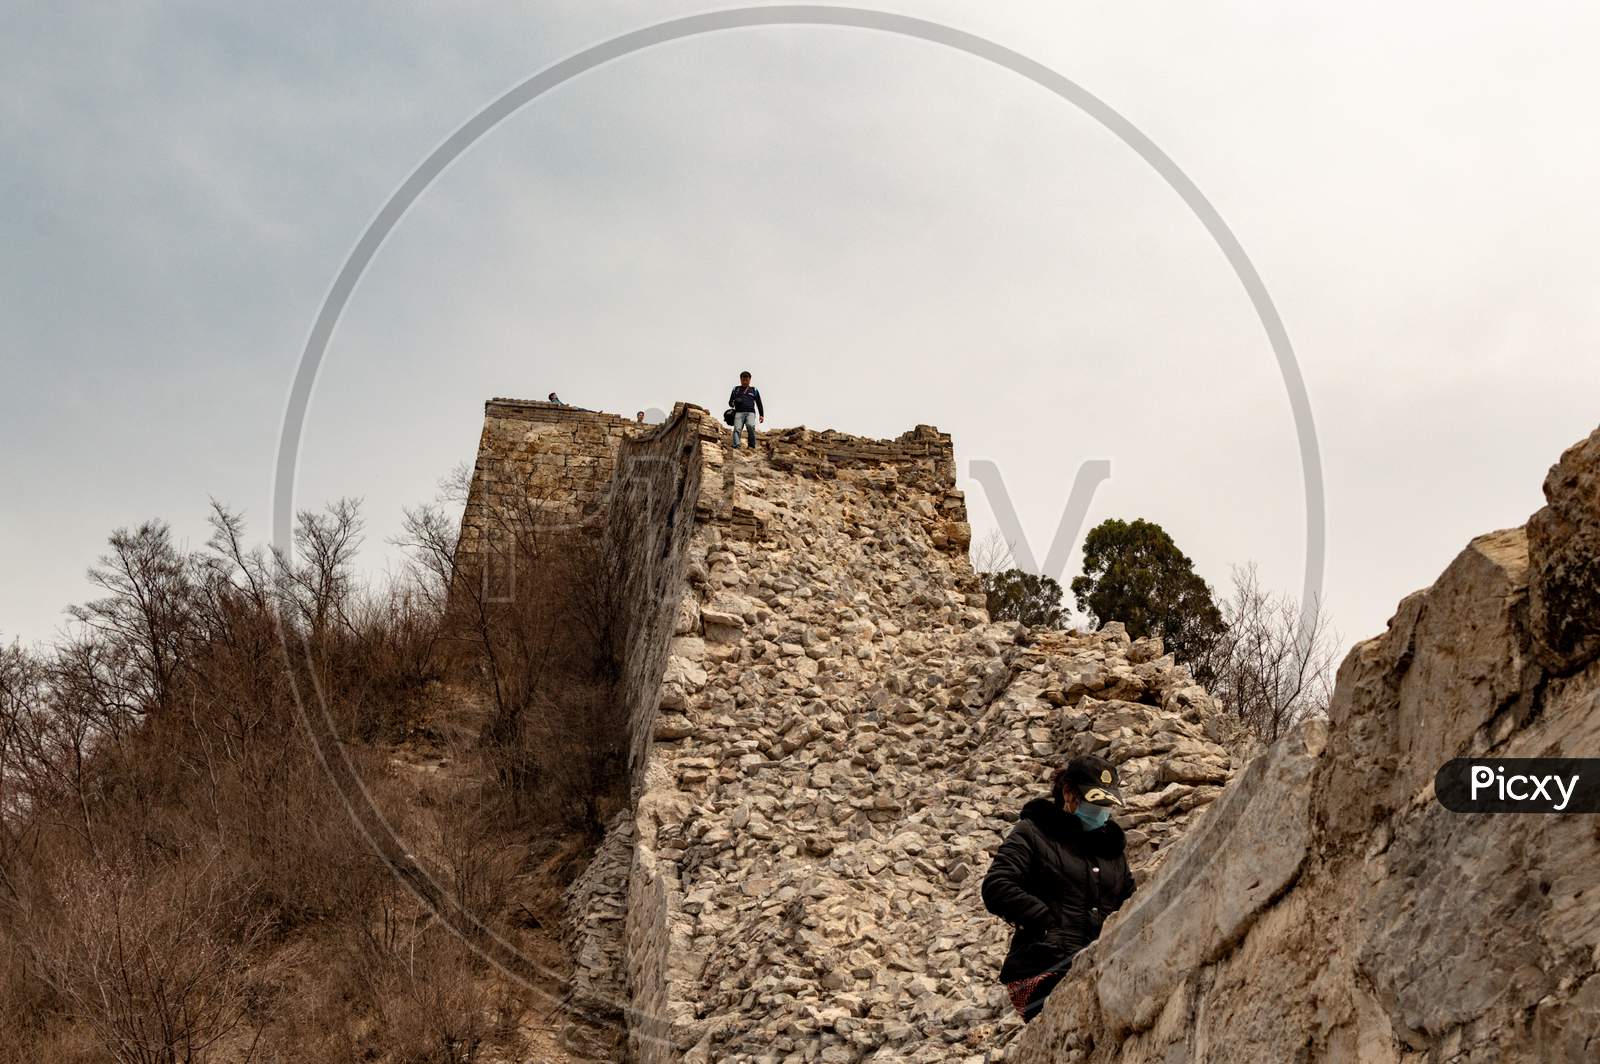 Jiankou, Unrestored Section Of The Great Wall Of China In The Huairou District